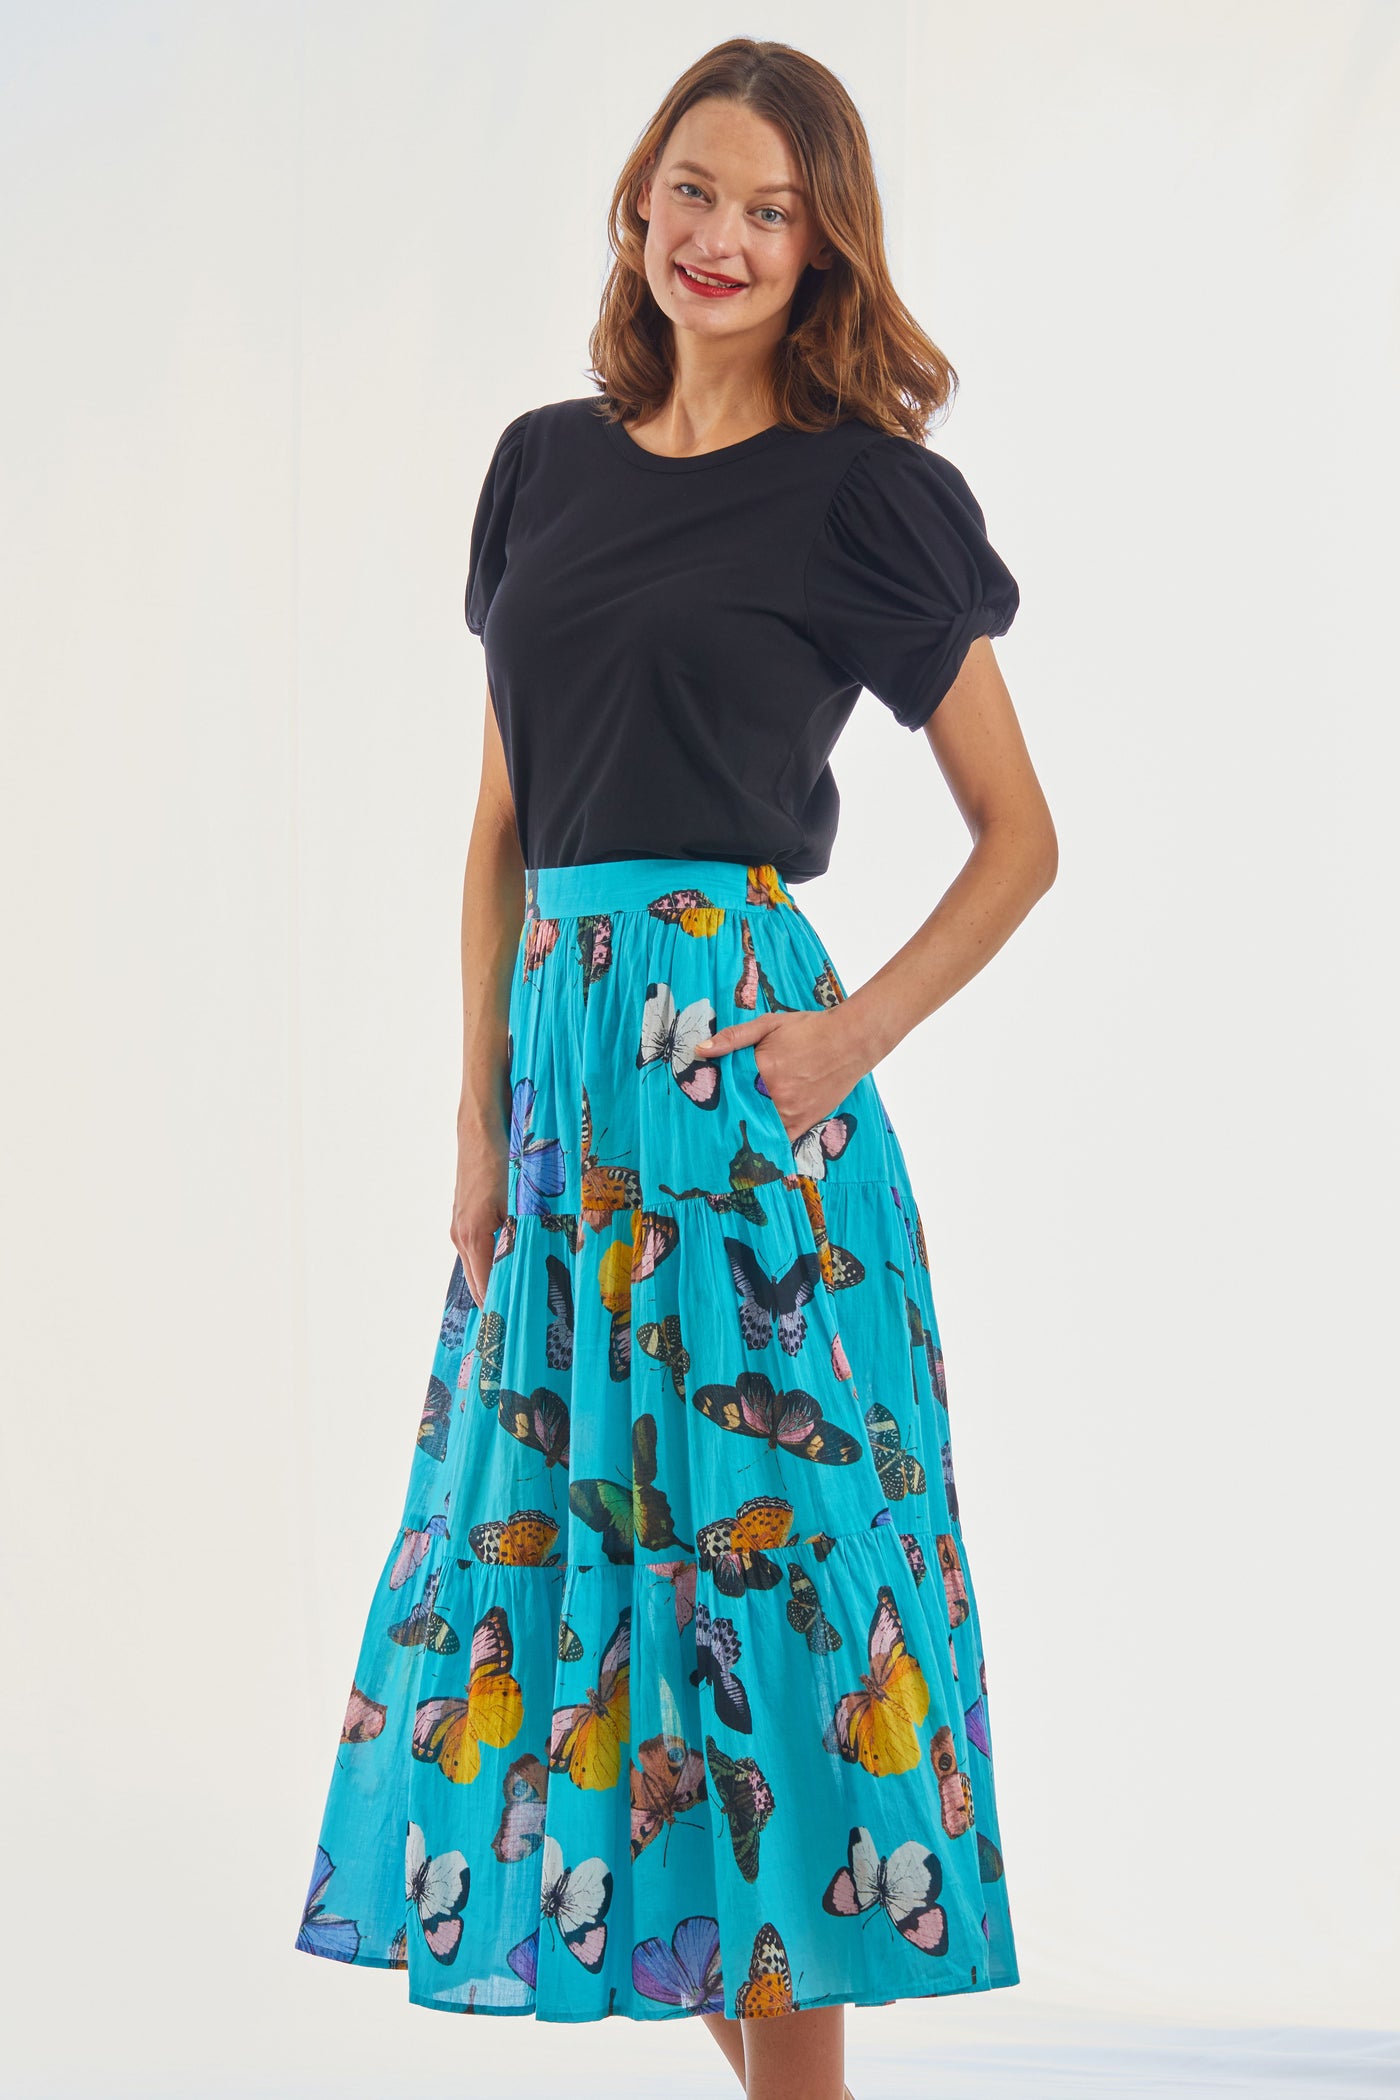 Woodstock Turquoise Butterfly Pull On Flounce Skirt